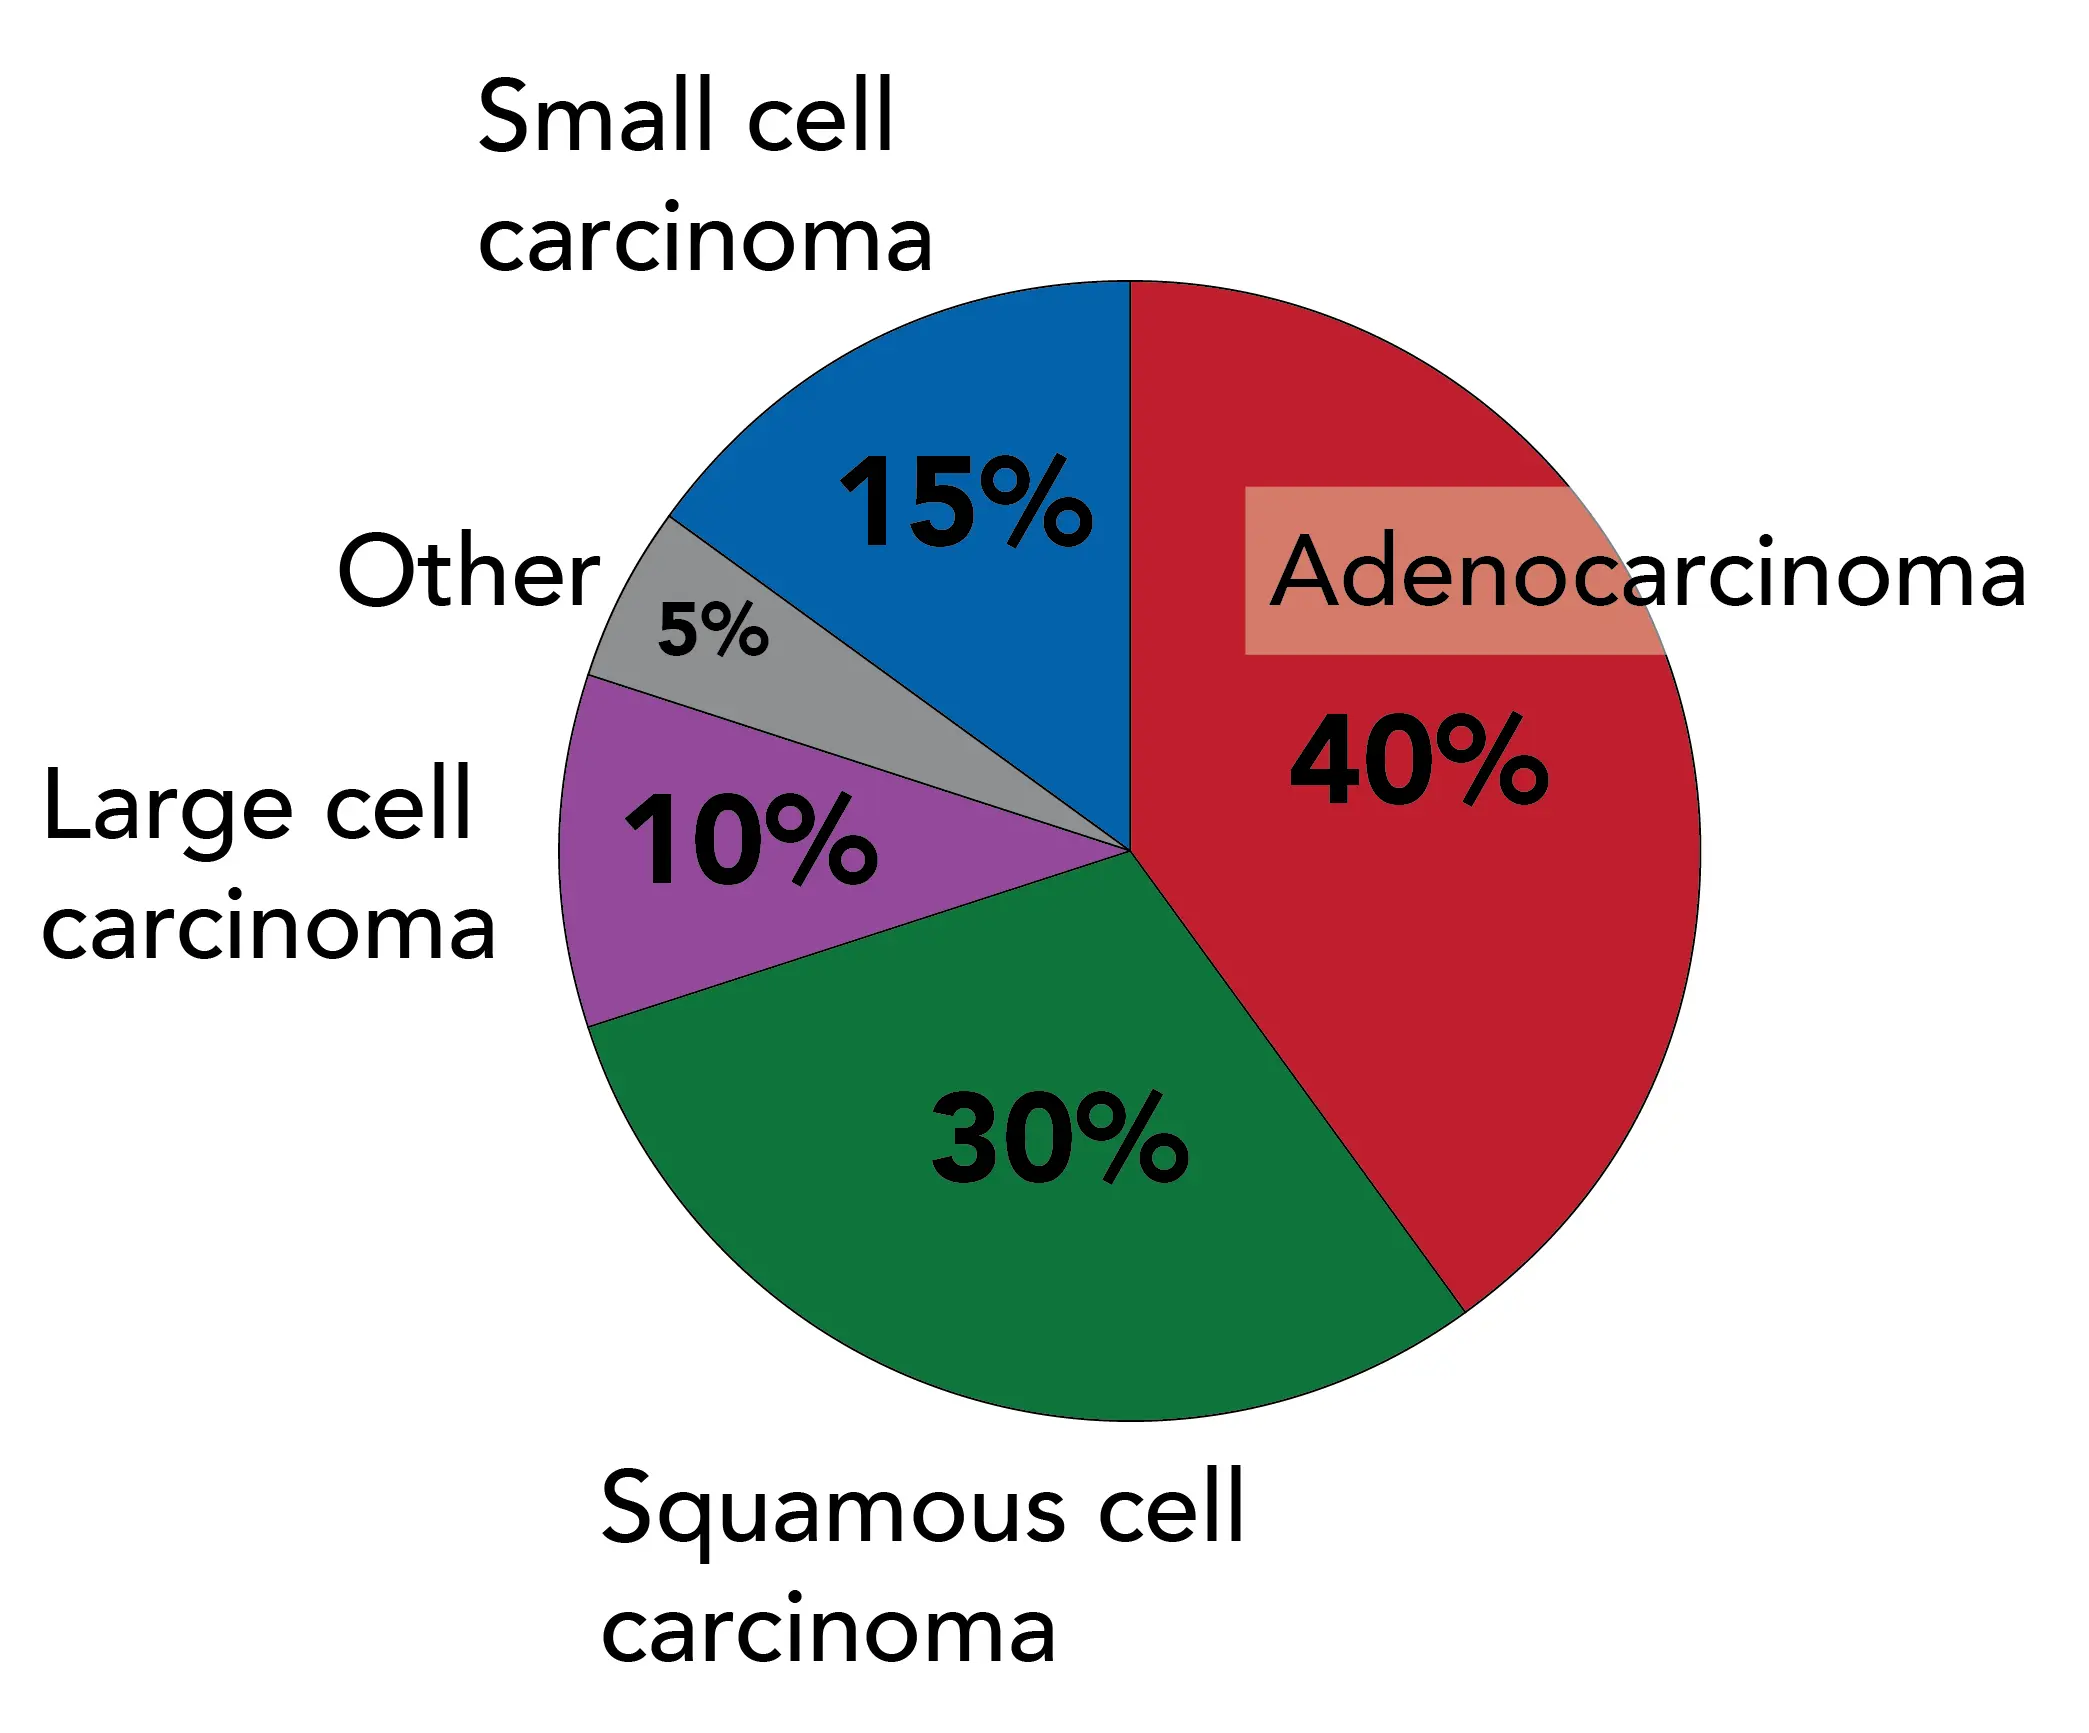 Adenocarcinoma and squamous cell carcinoma are the most common types of lung cancer.